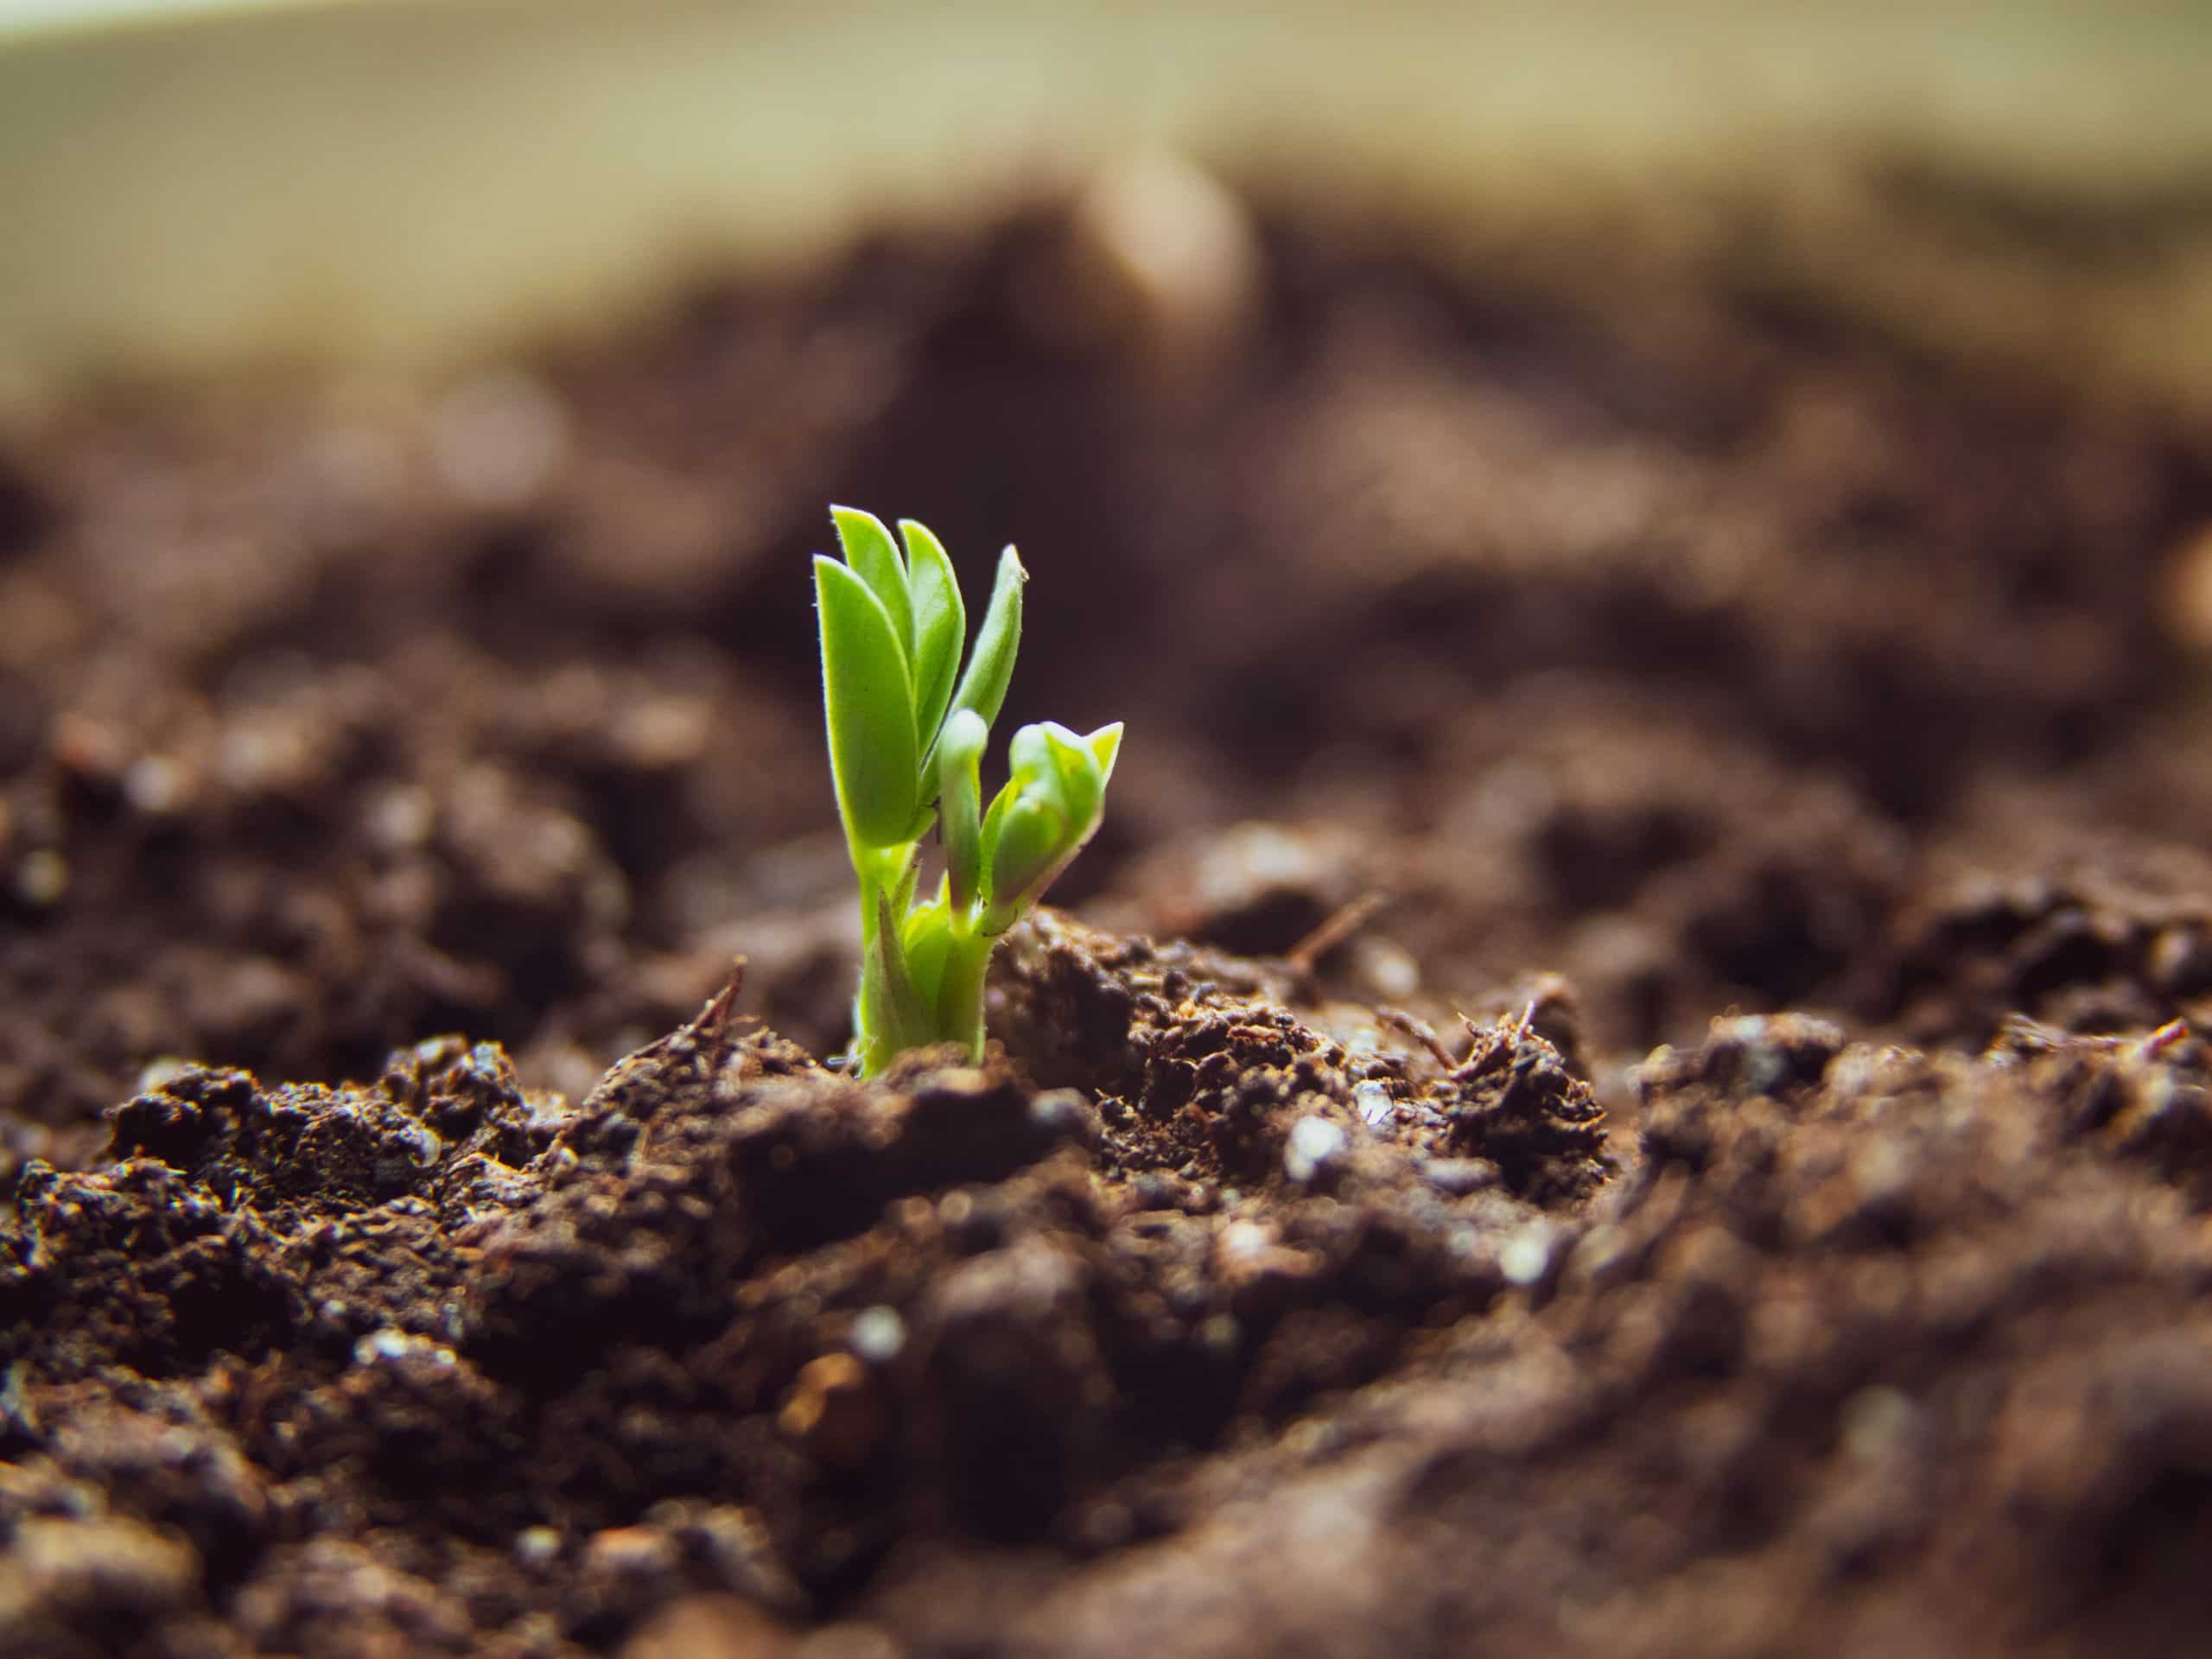 seedling stage of plant growth